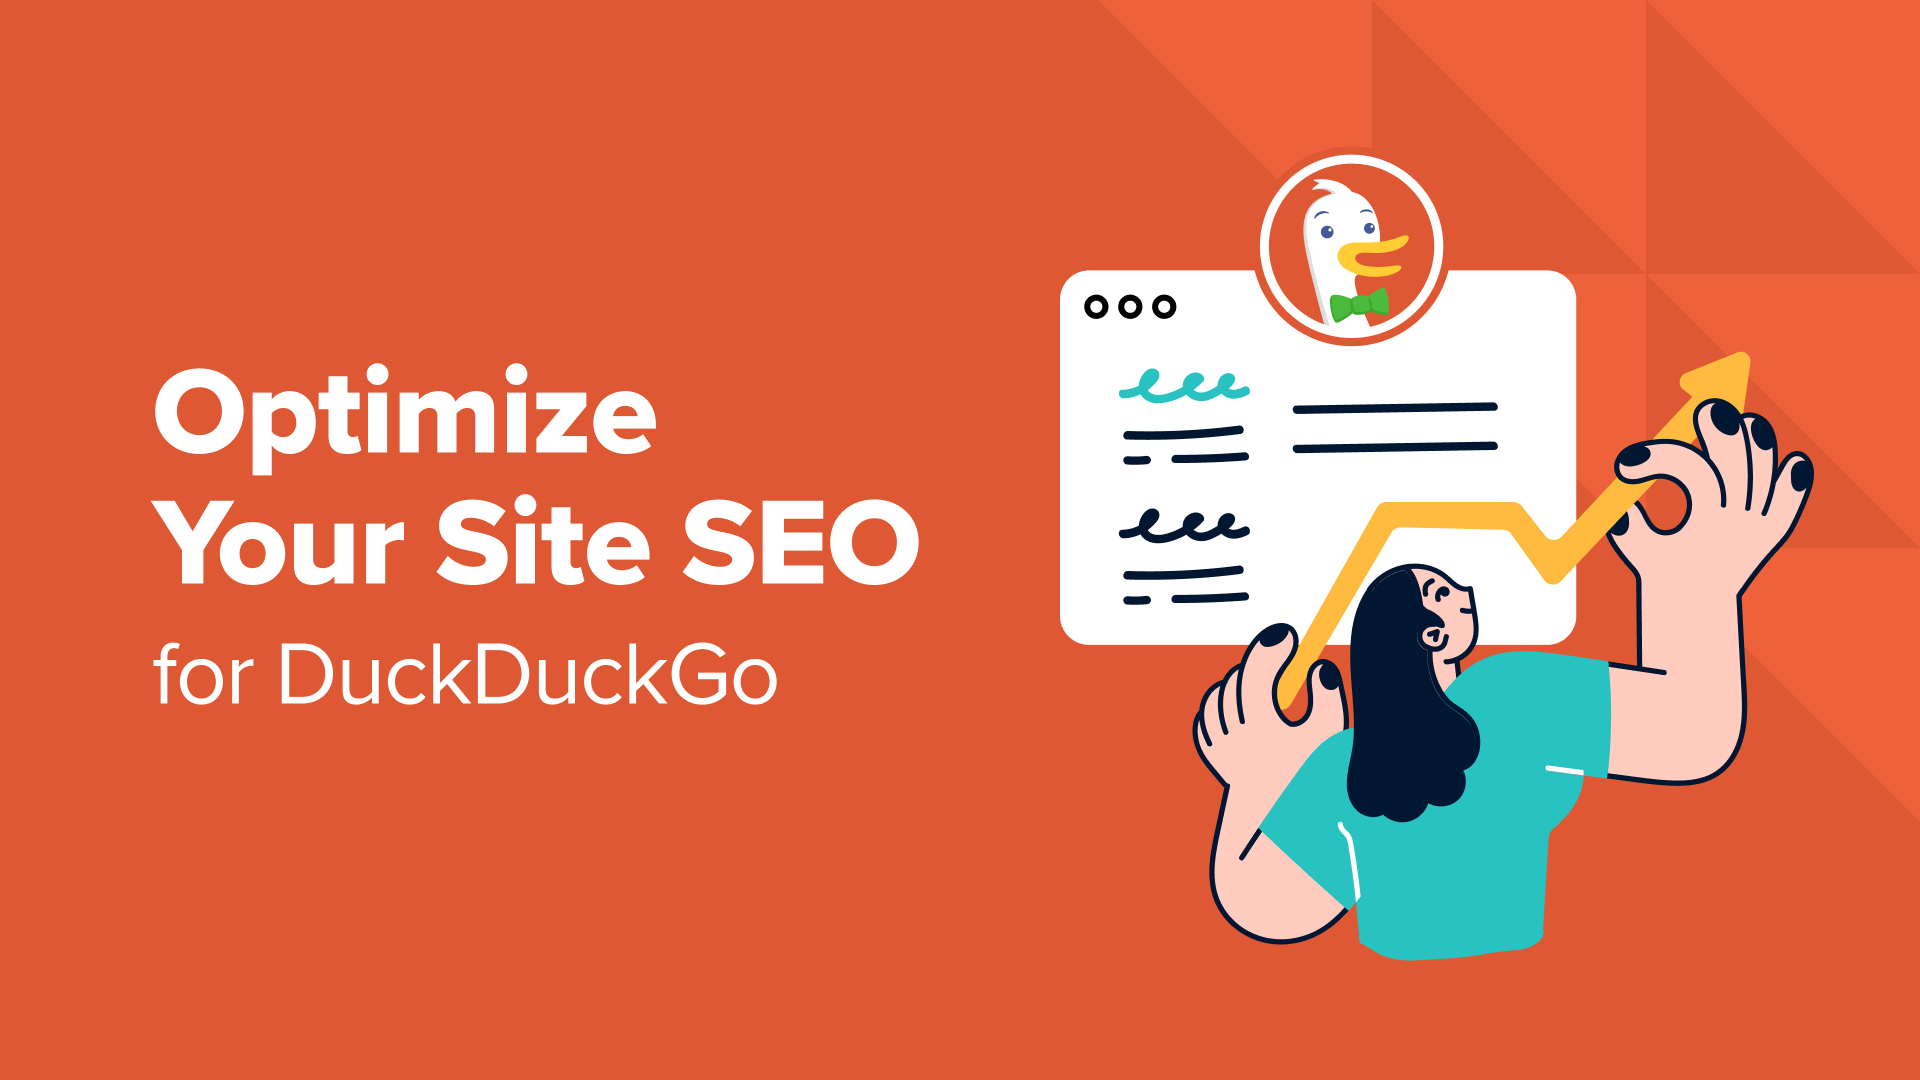 How to Optimize Your Site SEO for DuckDuckGo (7 Expert Tips)